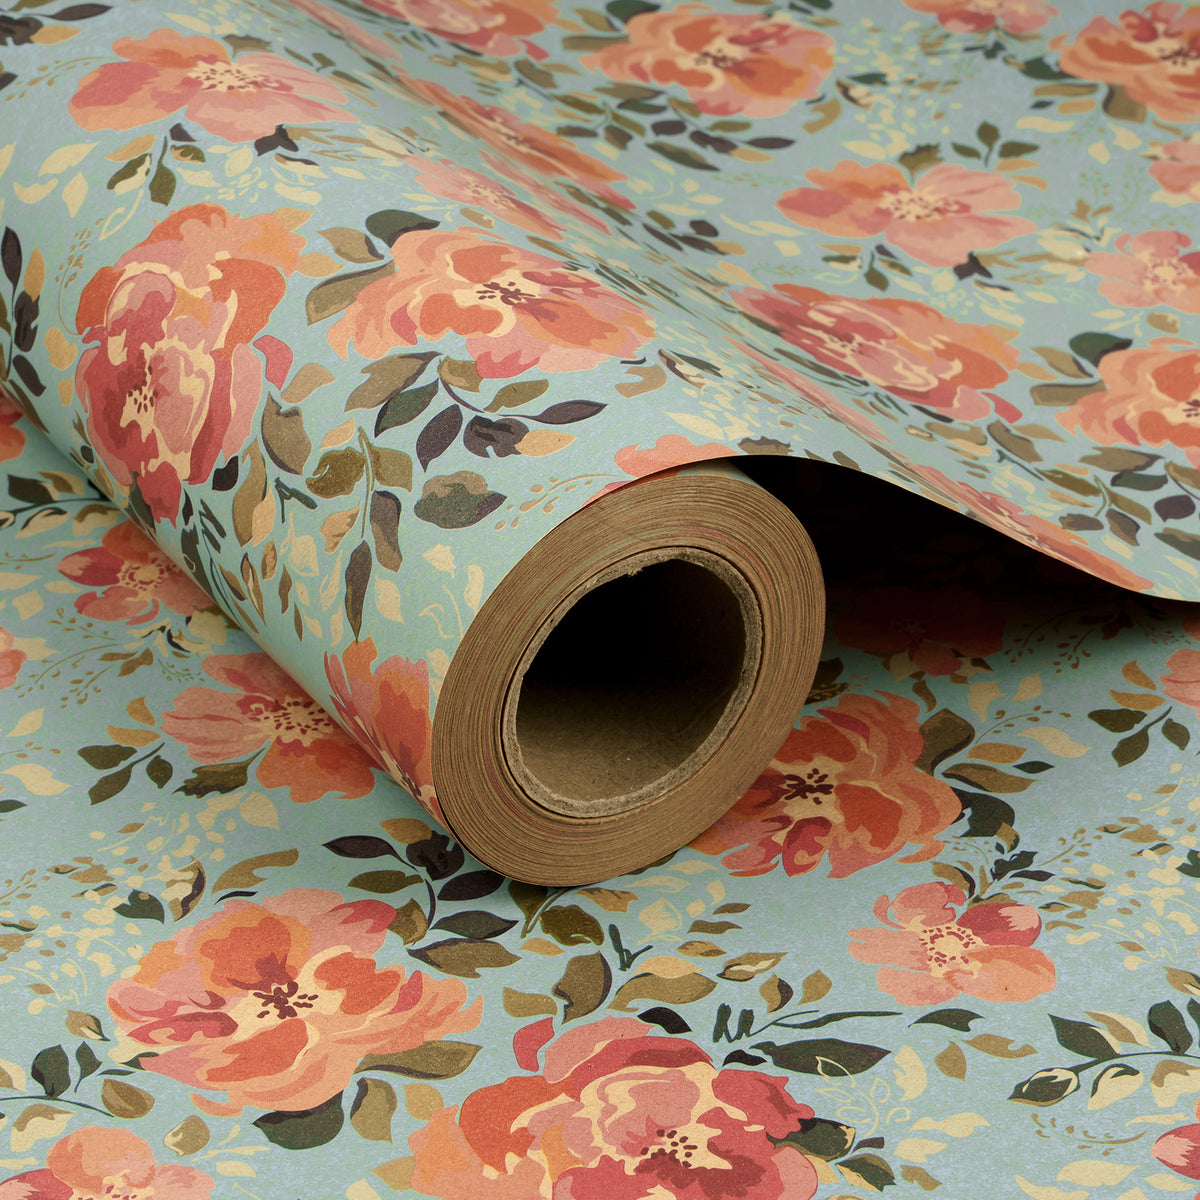 Vintage Floral Mix Wrapping Paper Collection - Wrapping Paper Sets